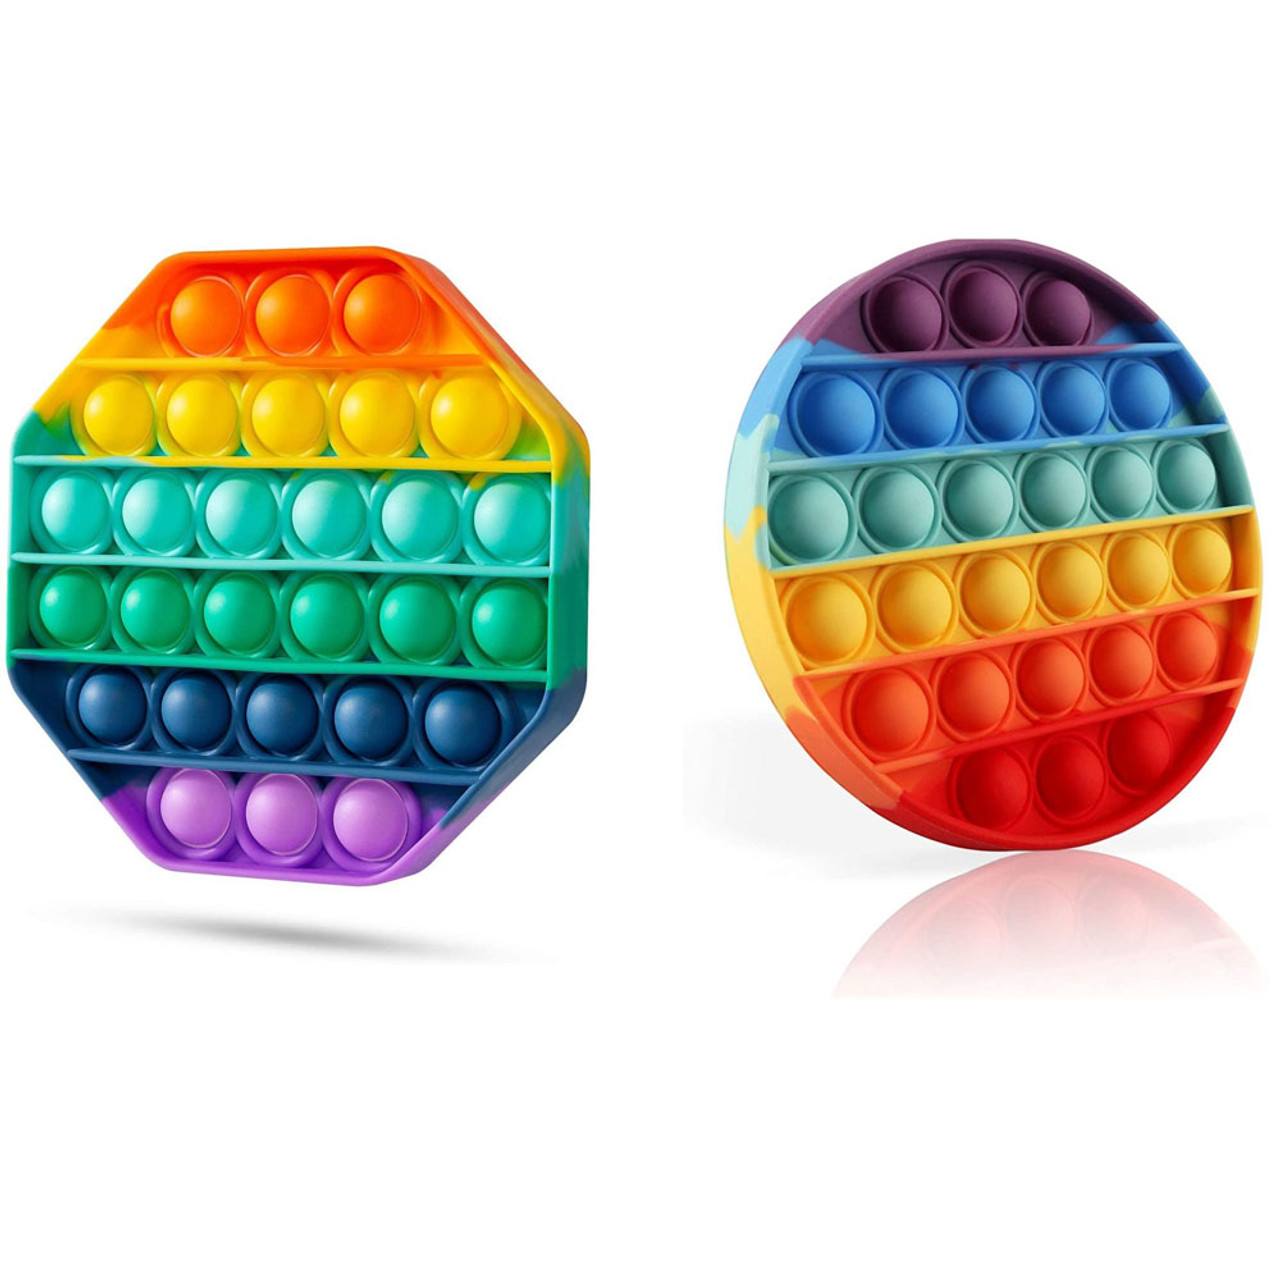 Rainbow Bubble Popper Anti-Stress Fidget Toy (2- or 4-Pack) product image